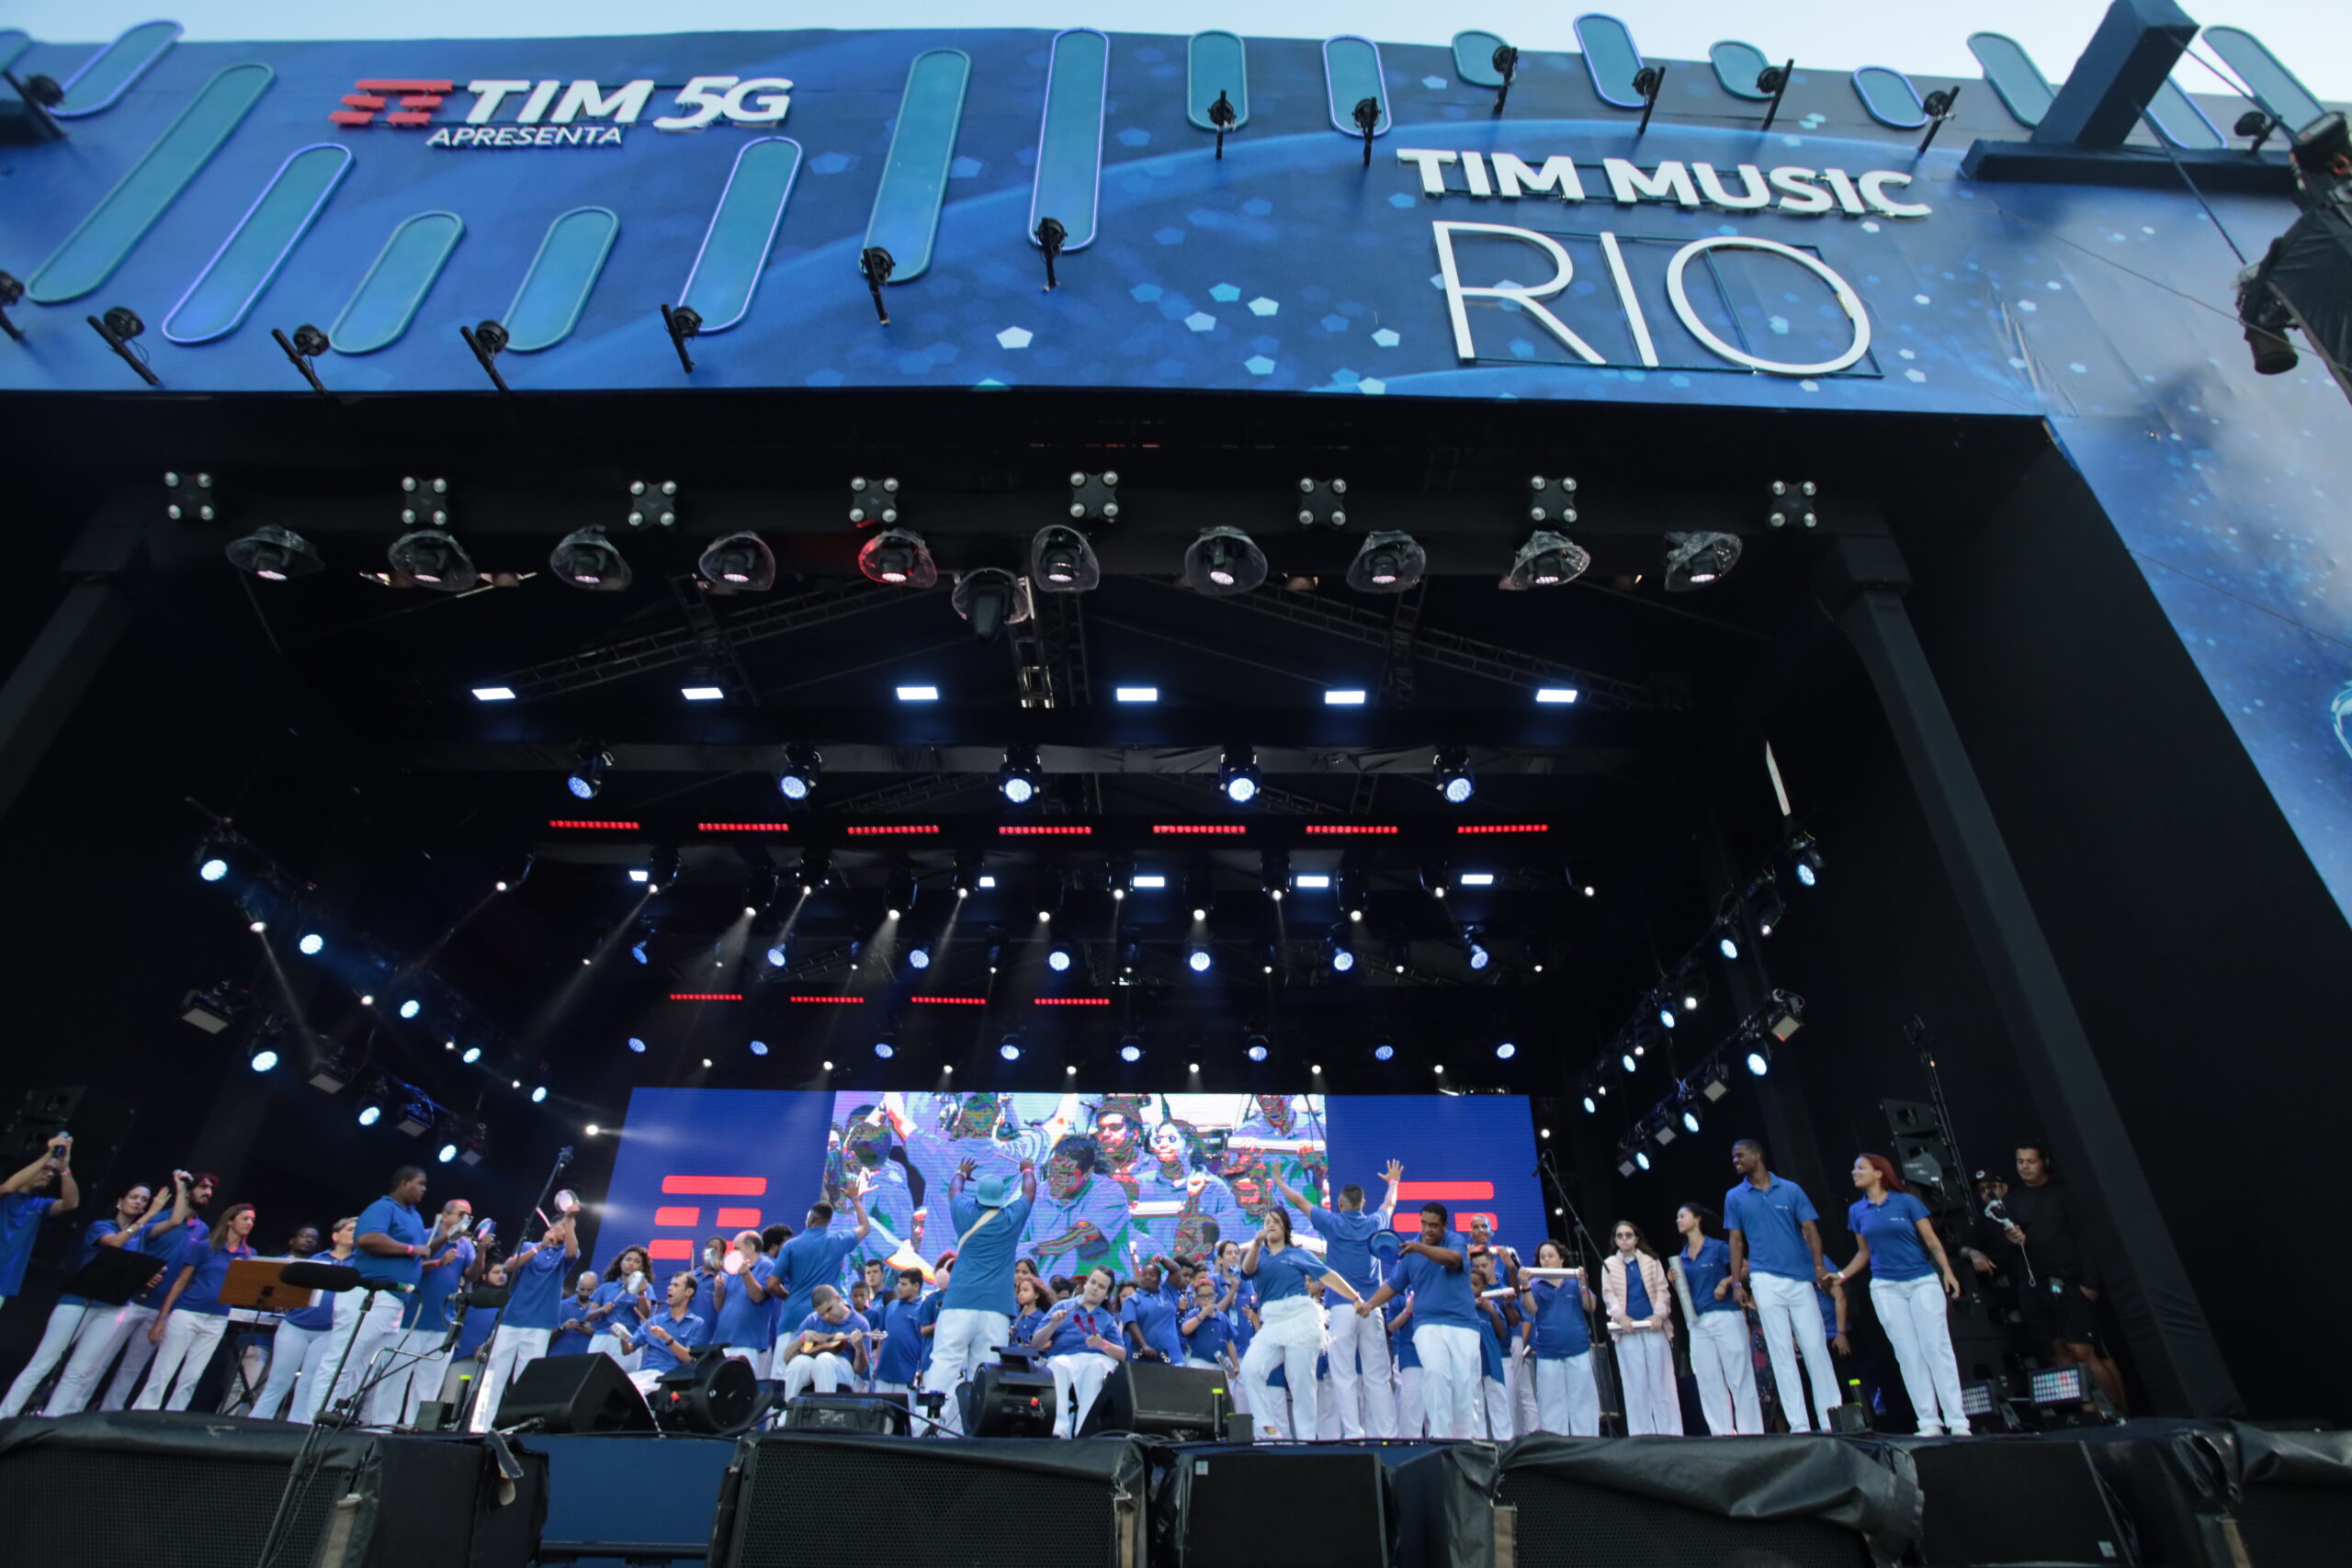 TIM Music Rio: The TIM Institute Drums thrill the audience and celebrate inclusion